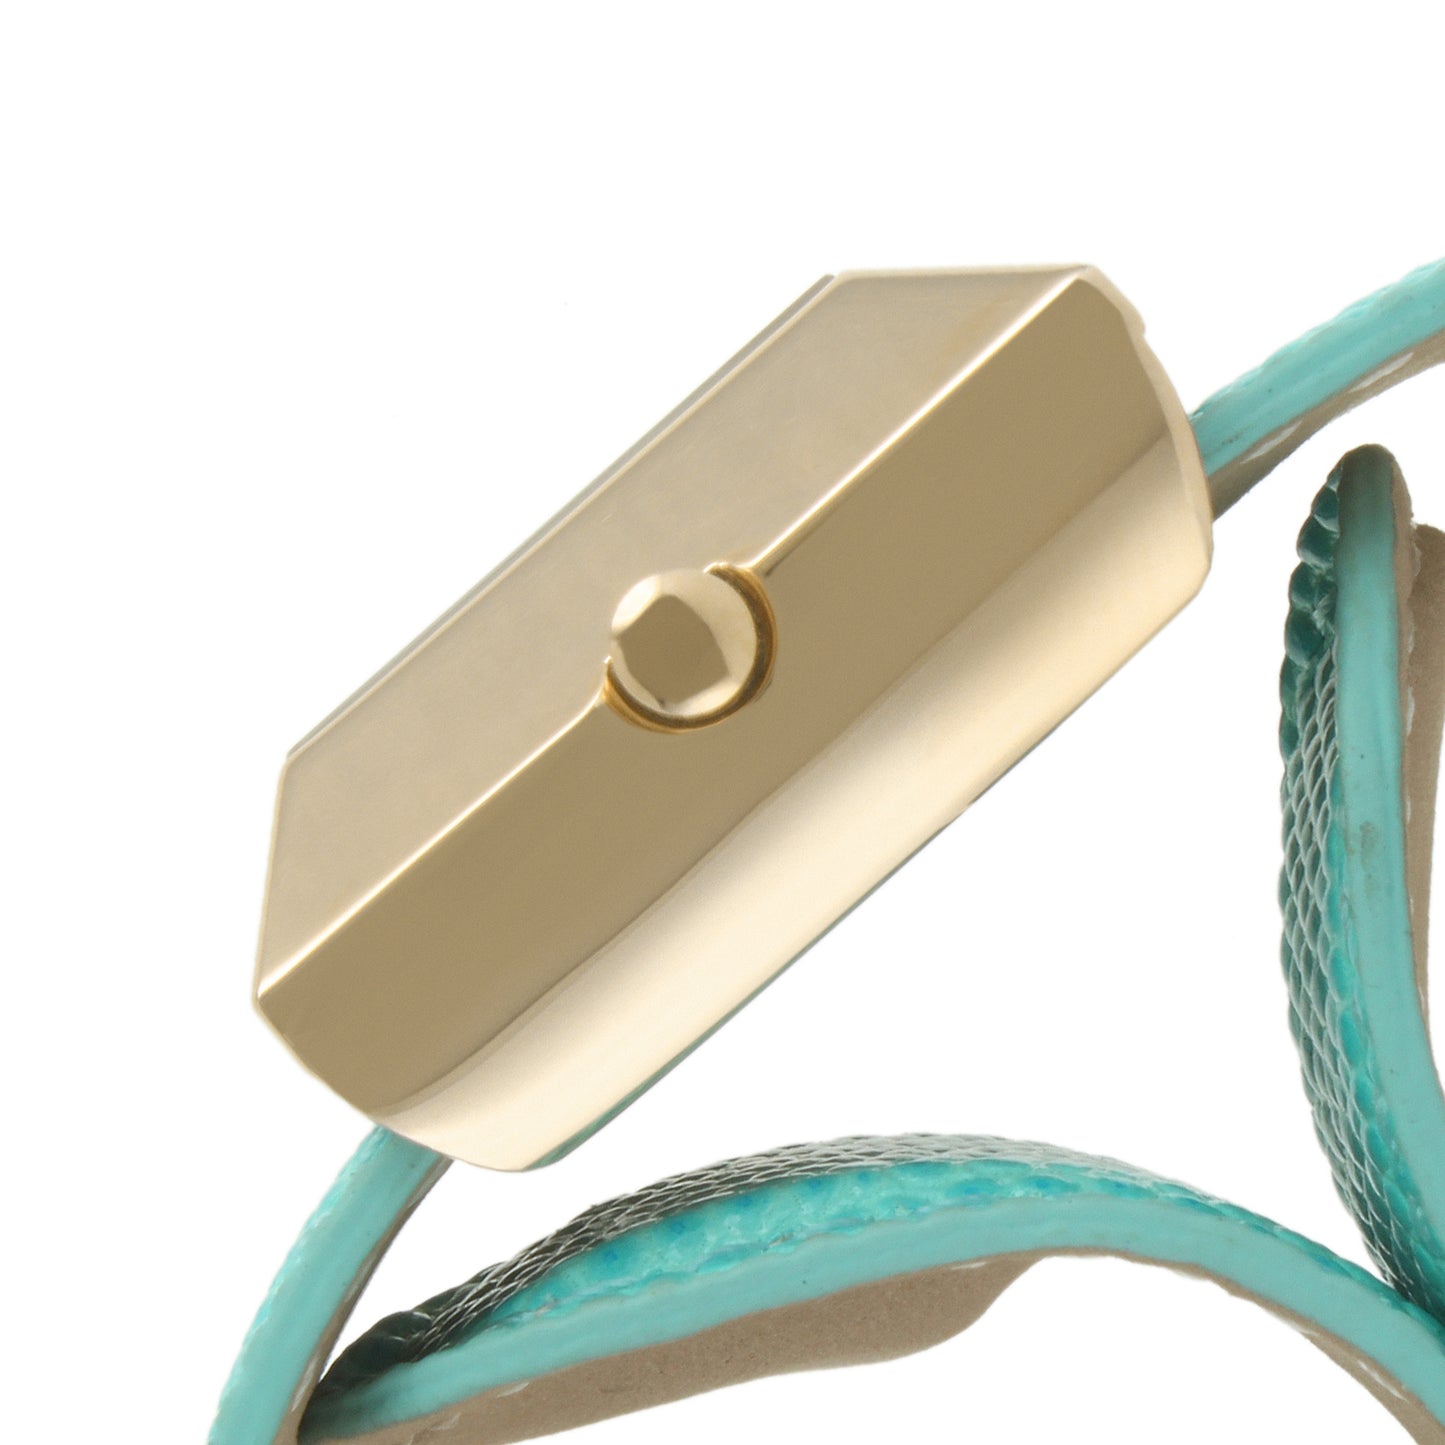 TKO Metal Slapper with Leather Band - Gold/Turquoise